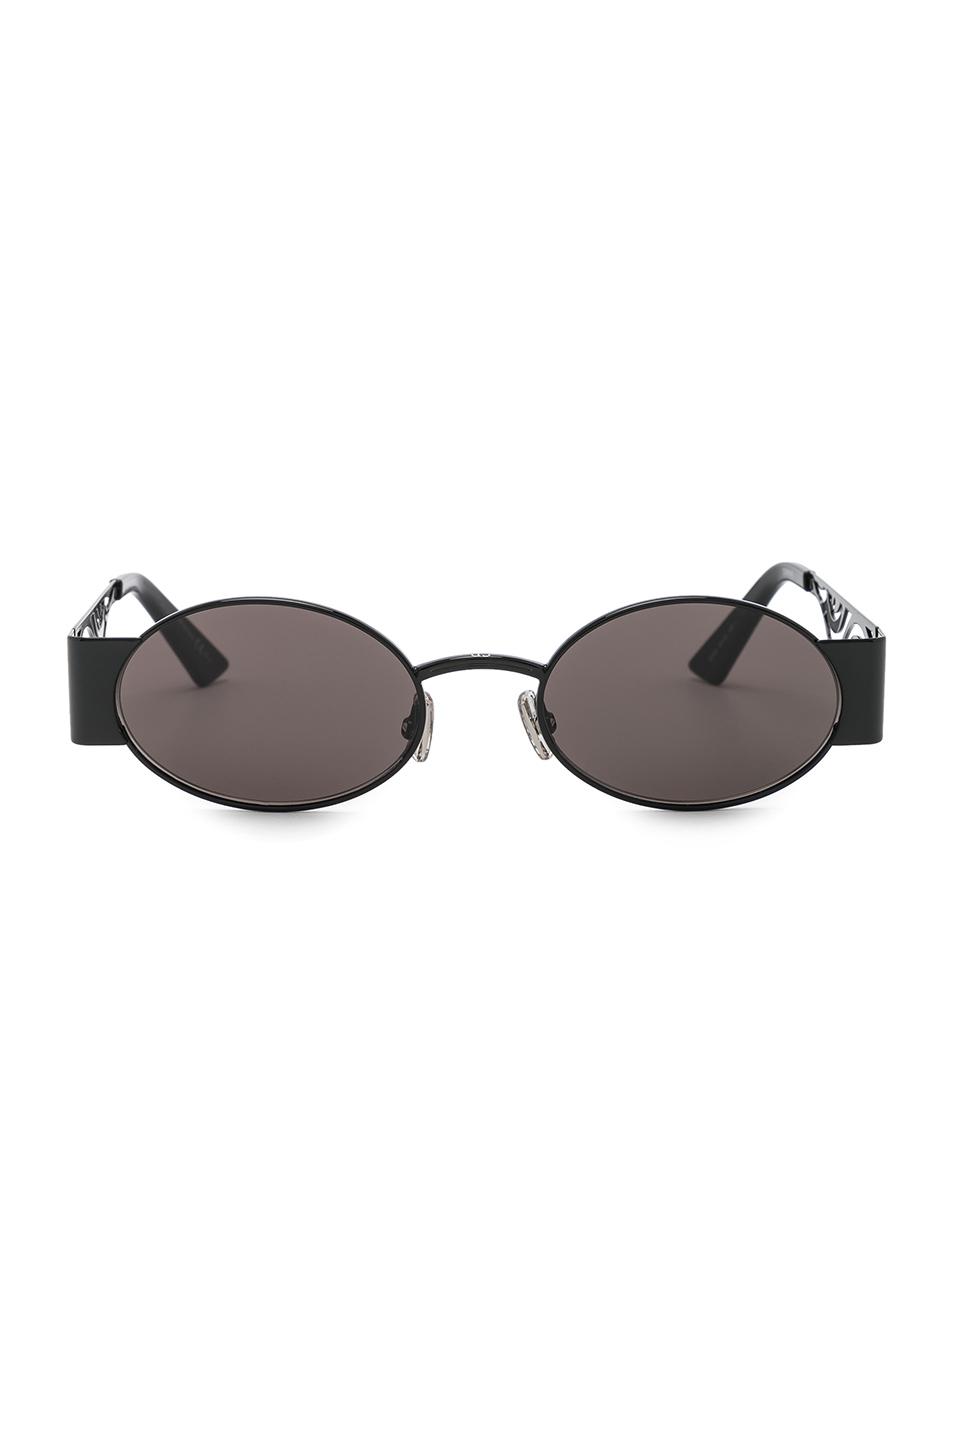 Dior Leather Rave Sunglasses in Black & Gray (Black) - Lyst